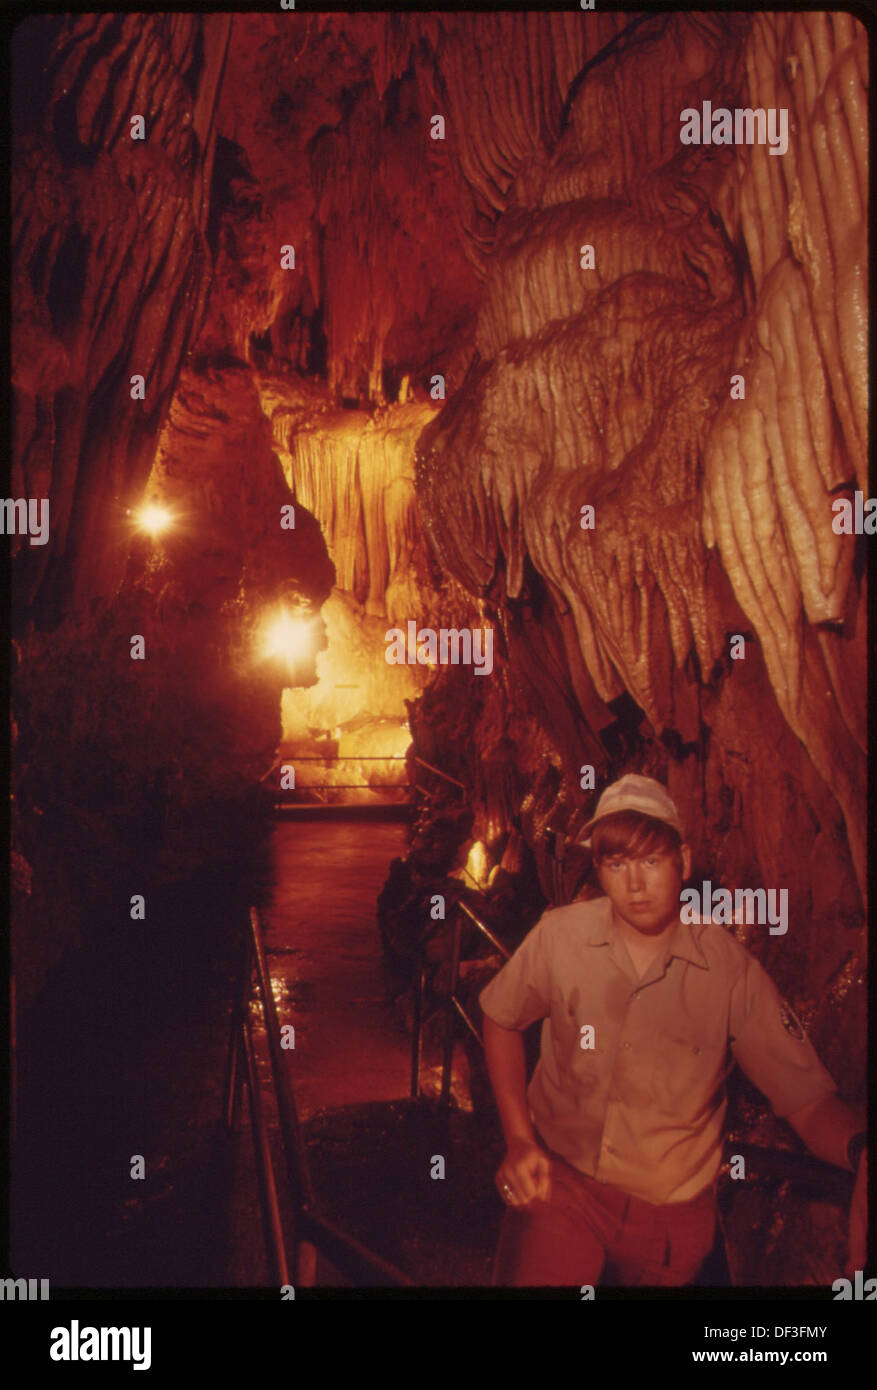 BILL MOULDER, GUIDE, NEAR THE END OF THE TOURISTS' PASSAGE IN BRIDAL CAVE. THE STALACTITES IN THE CAVE SUGGEST A... 551359 Stock Photo